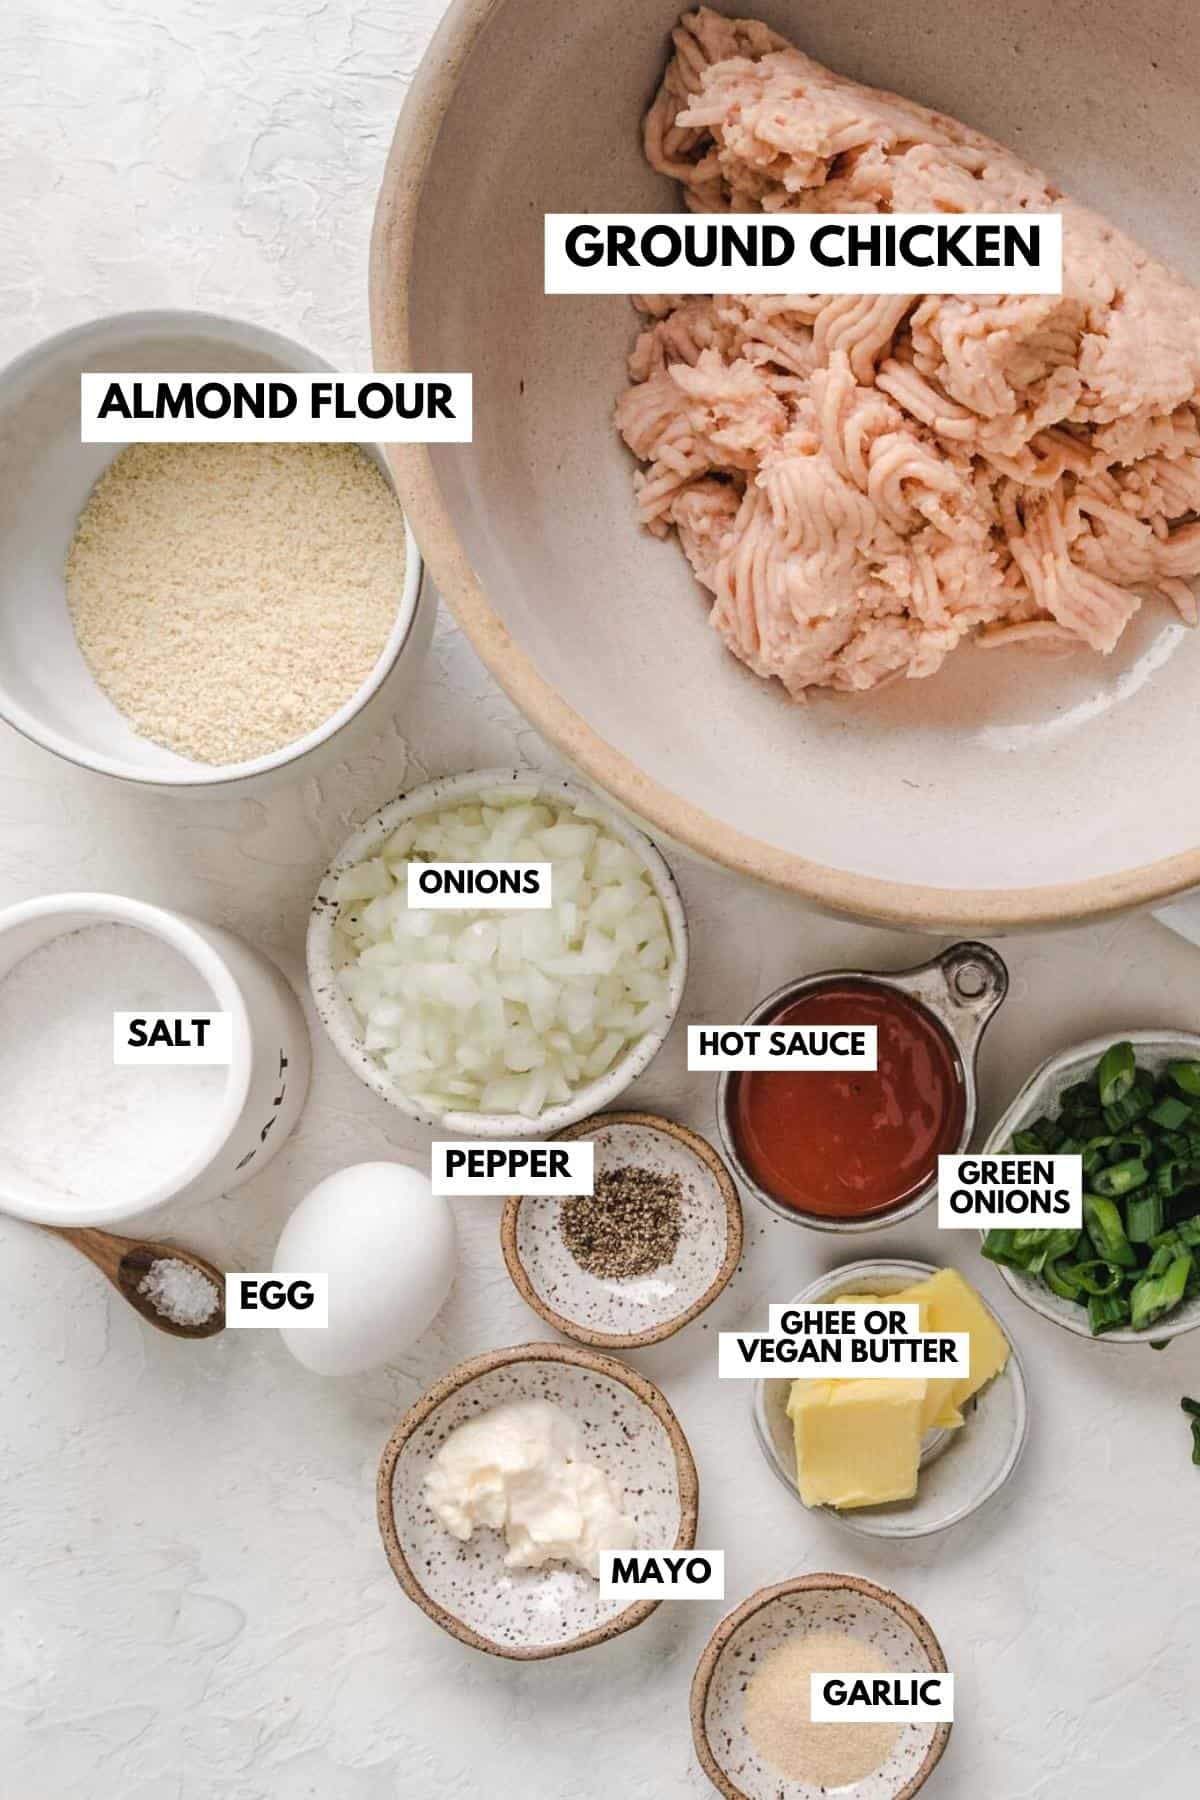 recipe ingredients in small bowls and labeled